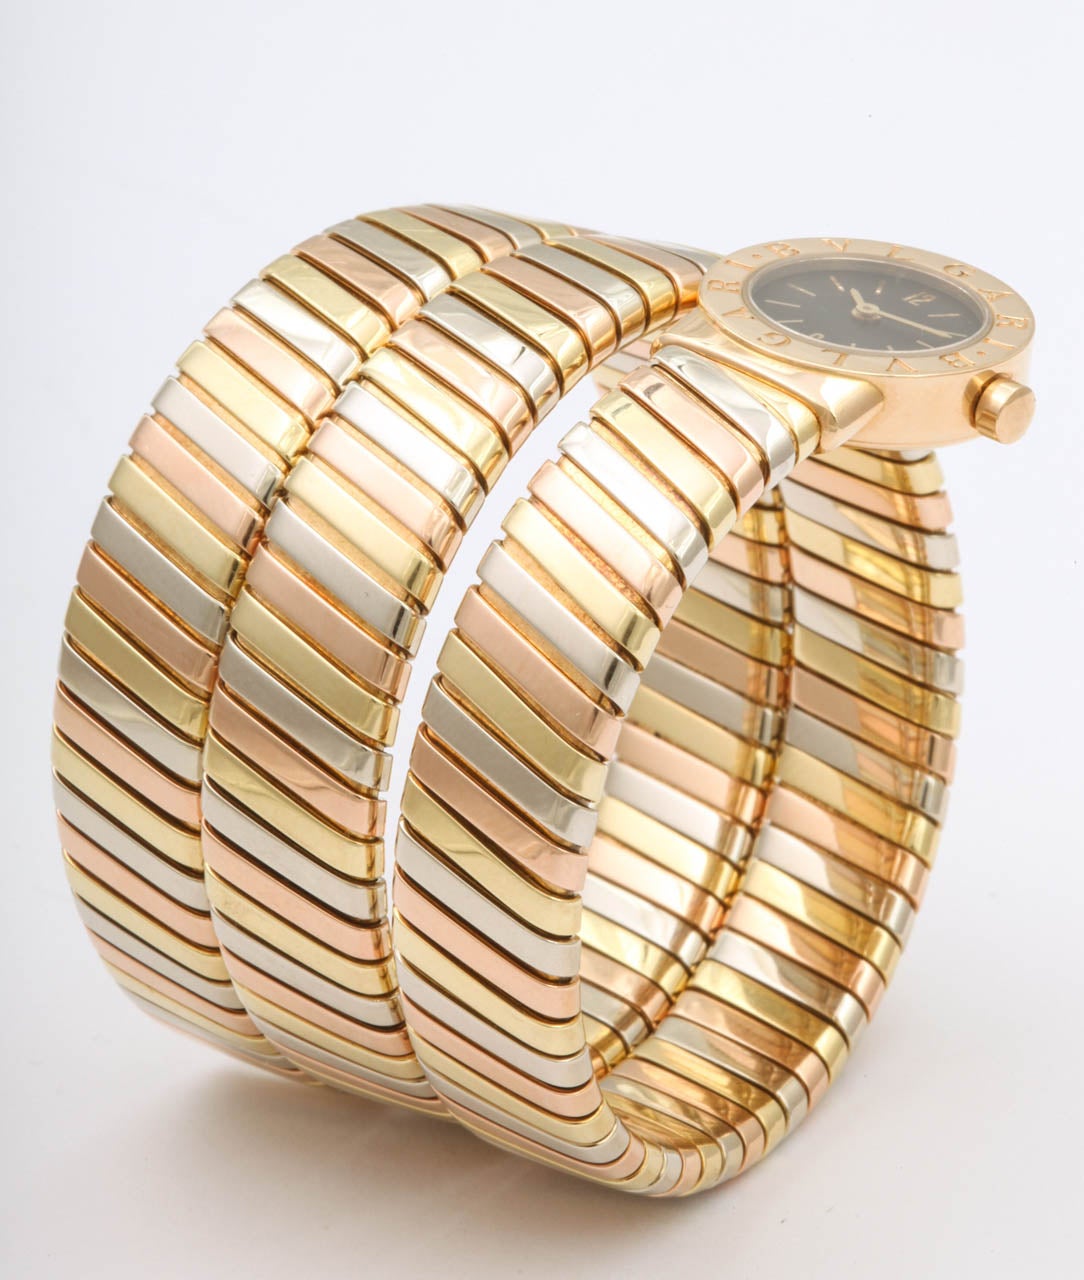 Bulgari lady's Tubogas Serpenti bracelet watch crafted in 18k yellow, rose and white gold.